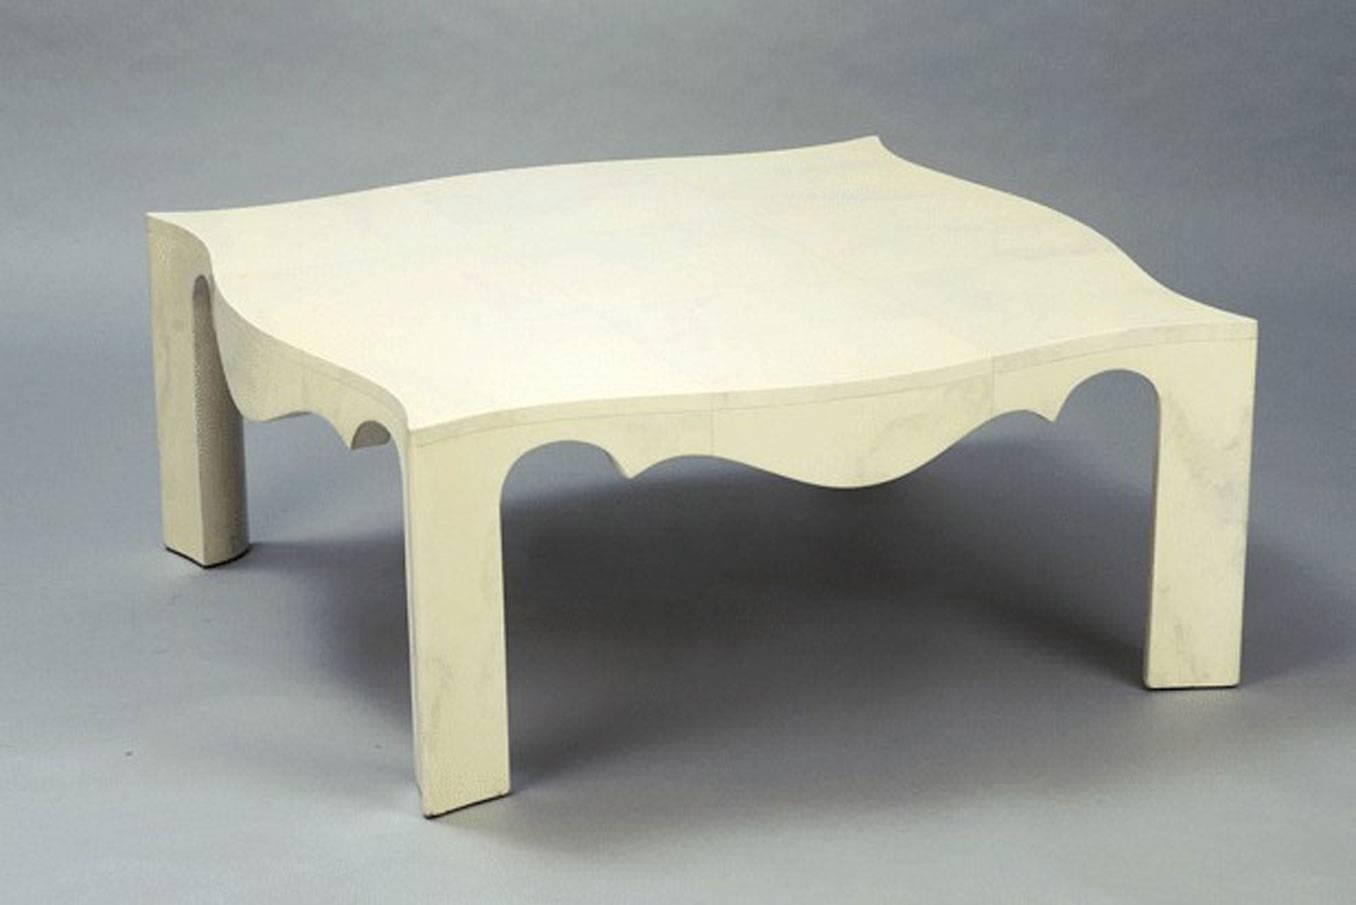 Serpentine-sided low table in lacquered wood. Custom-made by Quigley. Signed.